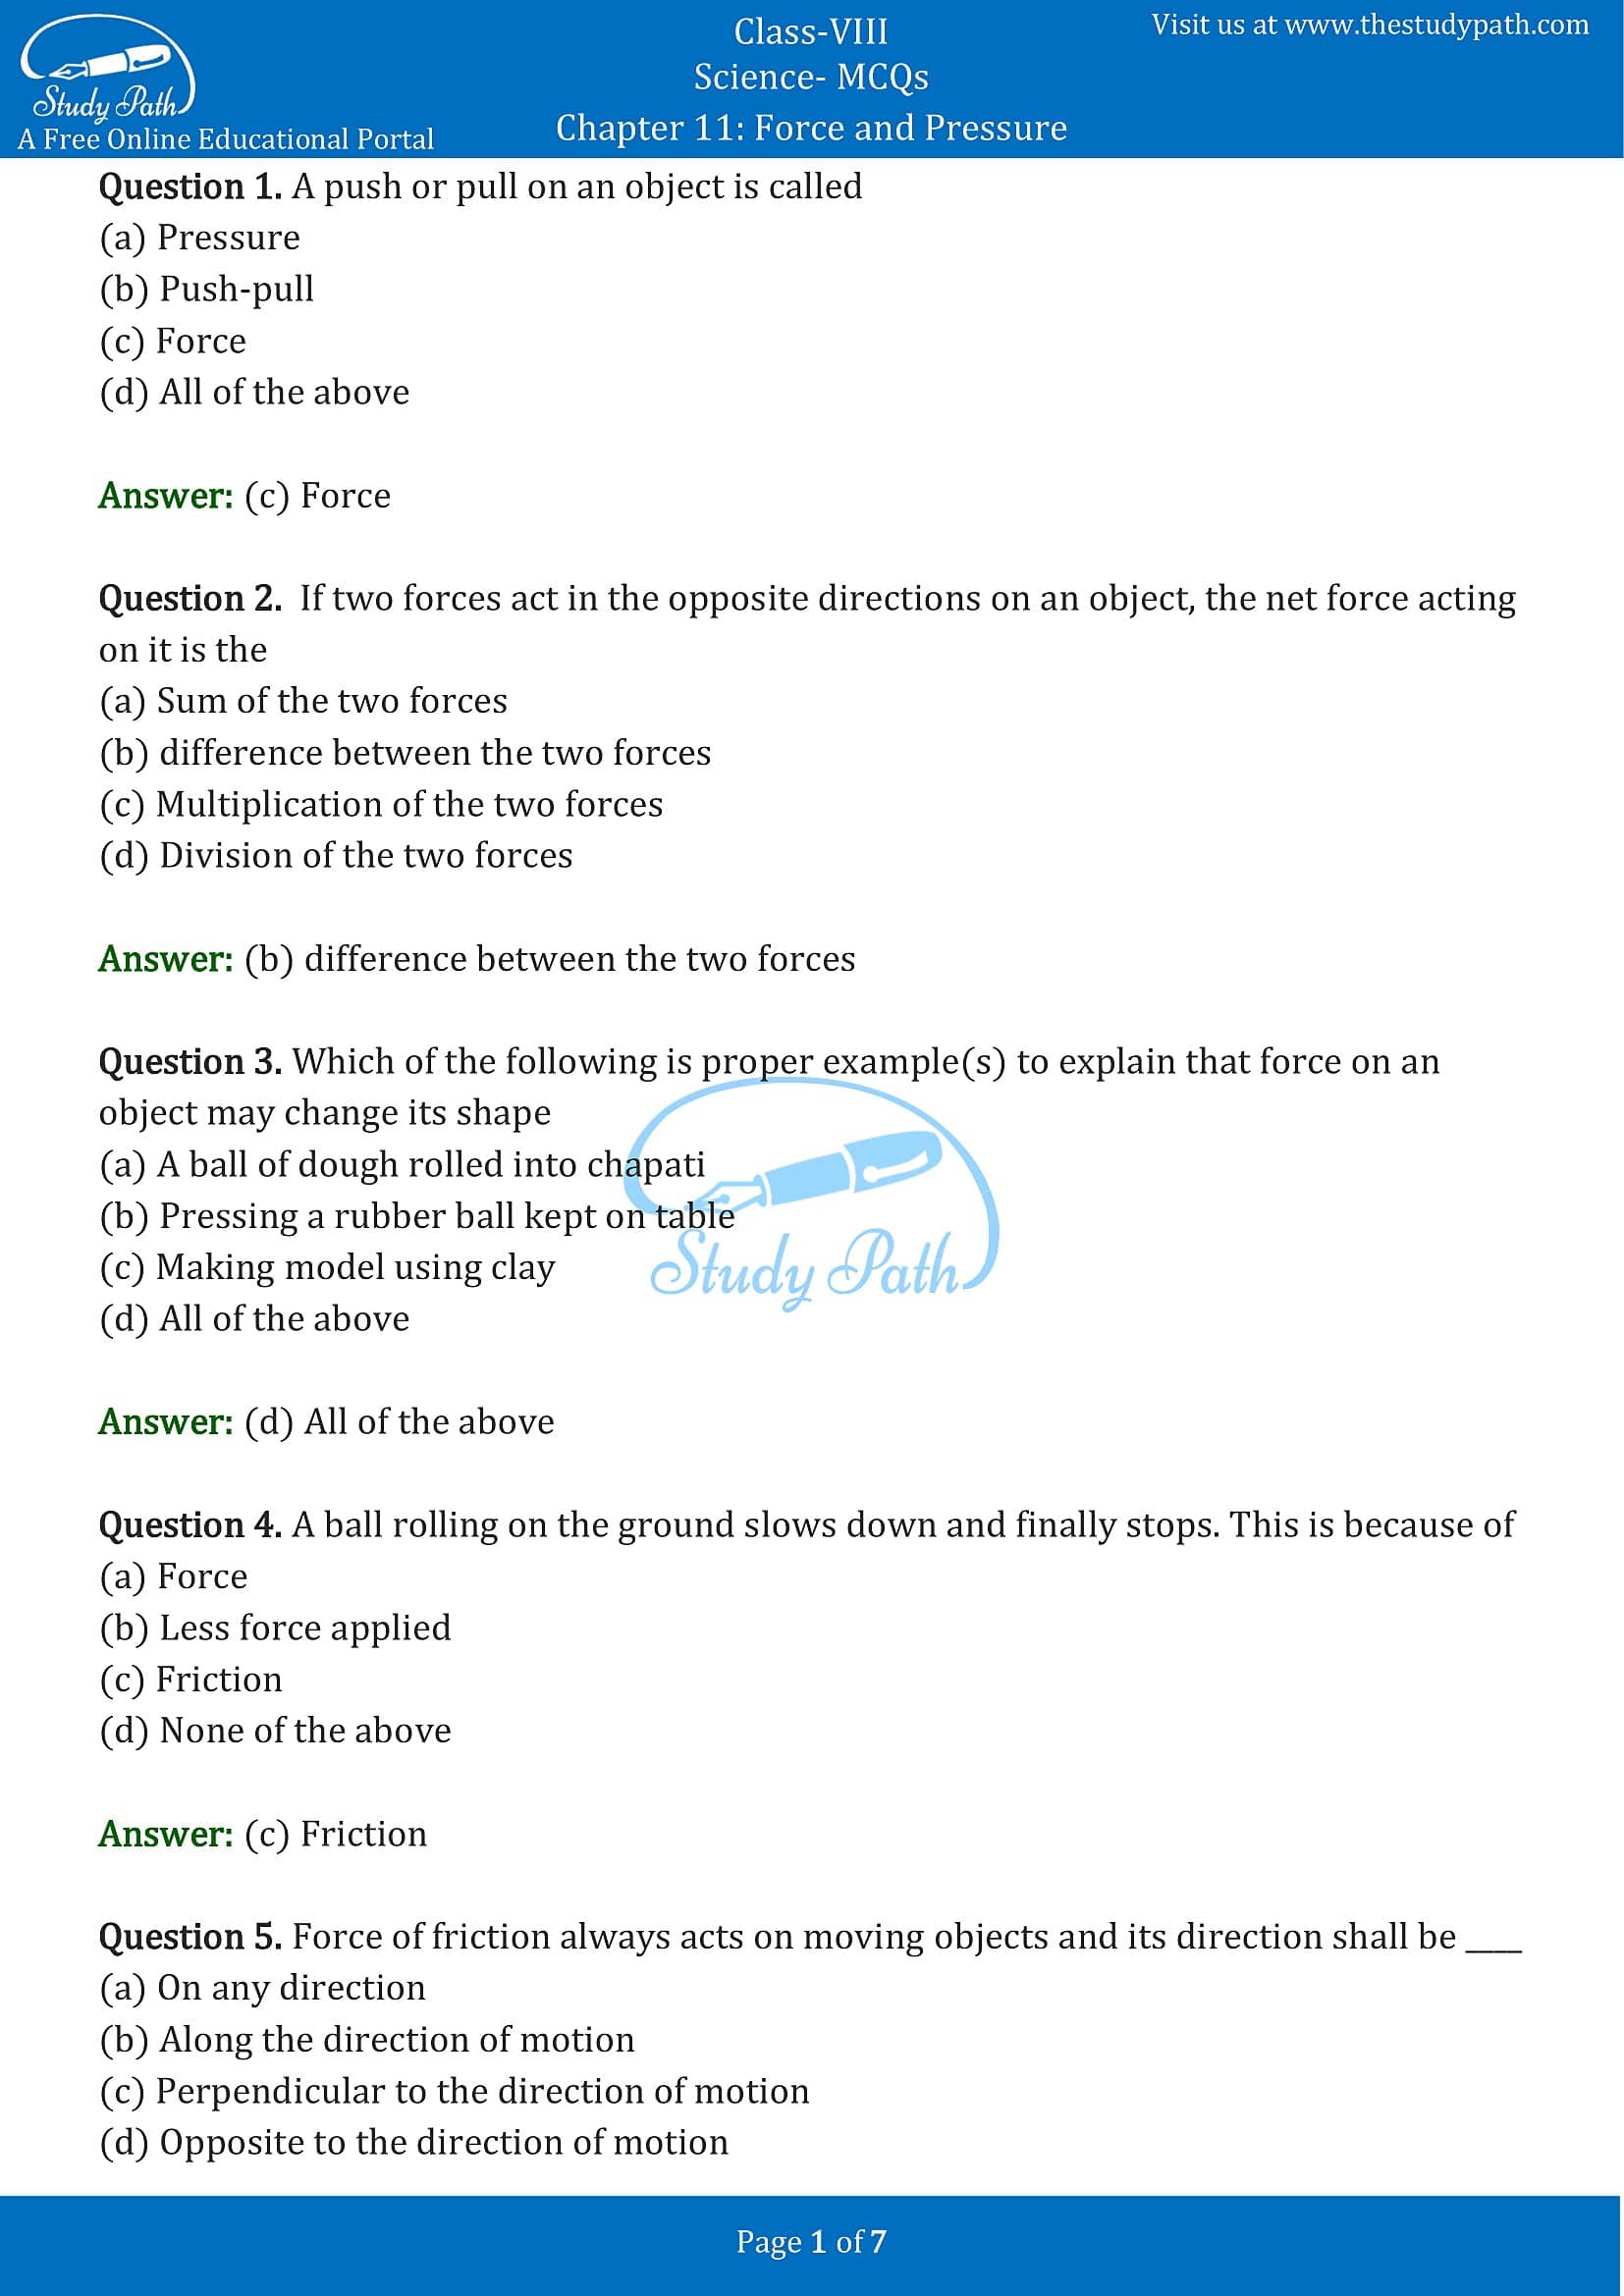 MCQ Questions for Class 8 Science Chapter 11 Force and Pressure with Answers PDF -1